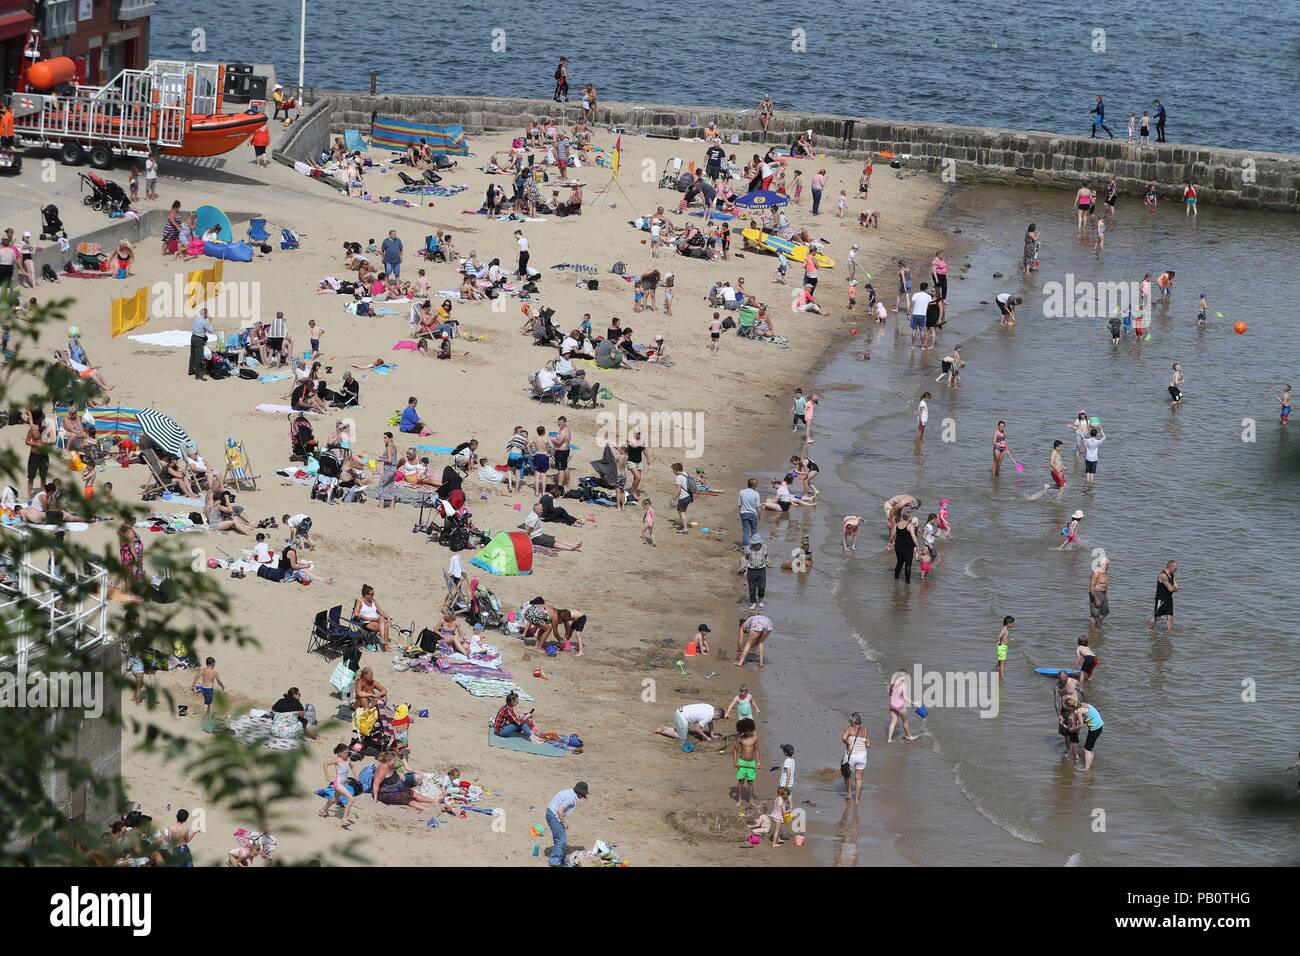 People enjoying the heatwave today on Cullercoats beach on North Tyneside as the hot weather continues across the UK, marking the driest start to a summer since modern records began in 1961. Stock Photo